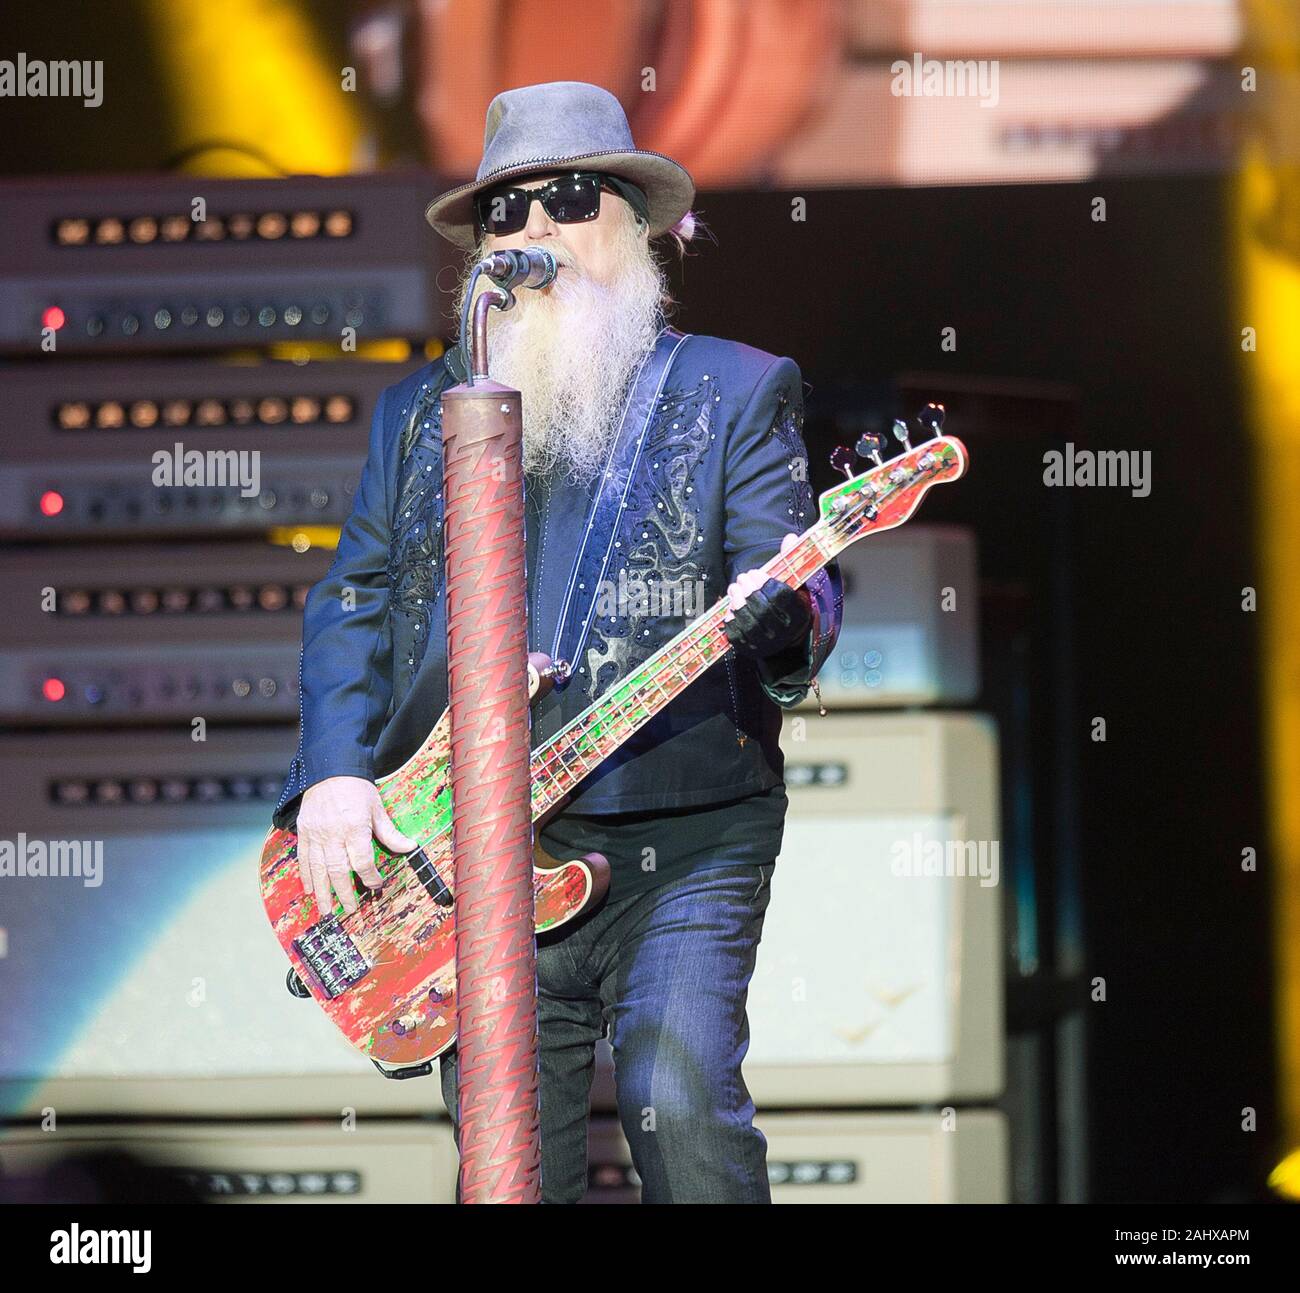 Oct. 5, 2019 - Raleigh, North Carolina; USA - Bass Guitarist DUSTY HILL of the band ZZ TOP performs live as 2019 tour makes a stop at the Coastal Credit Union